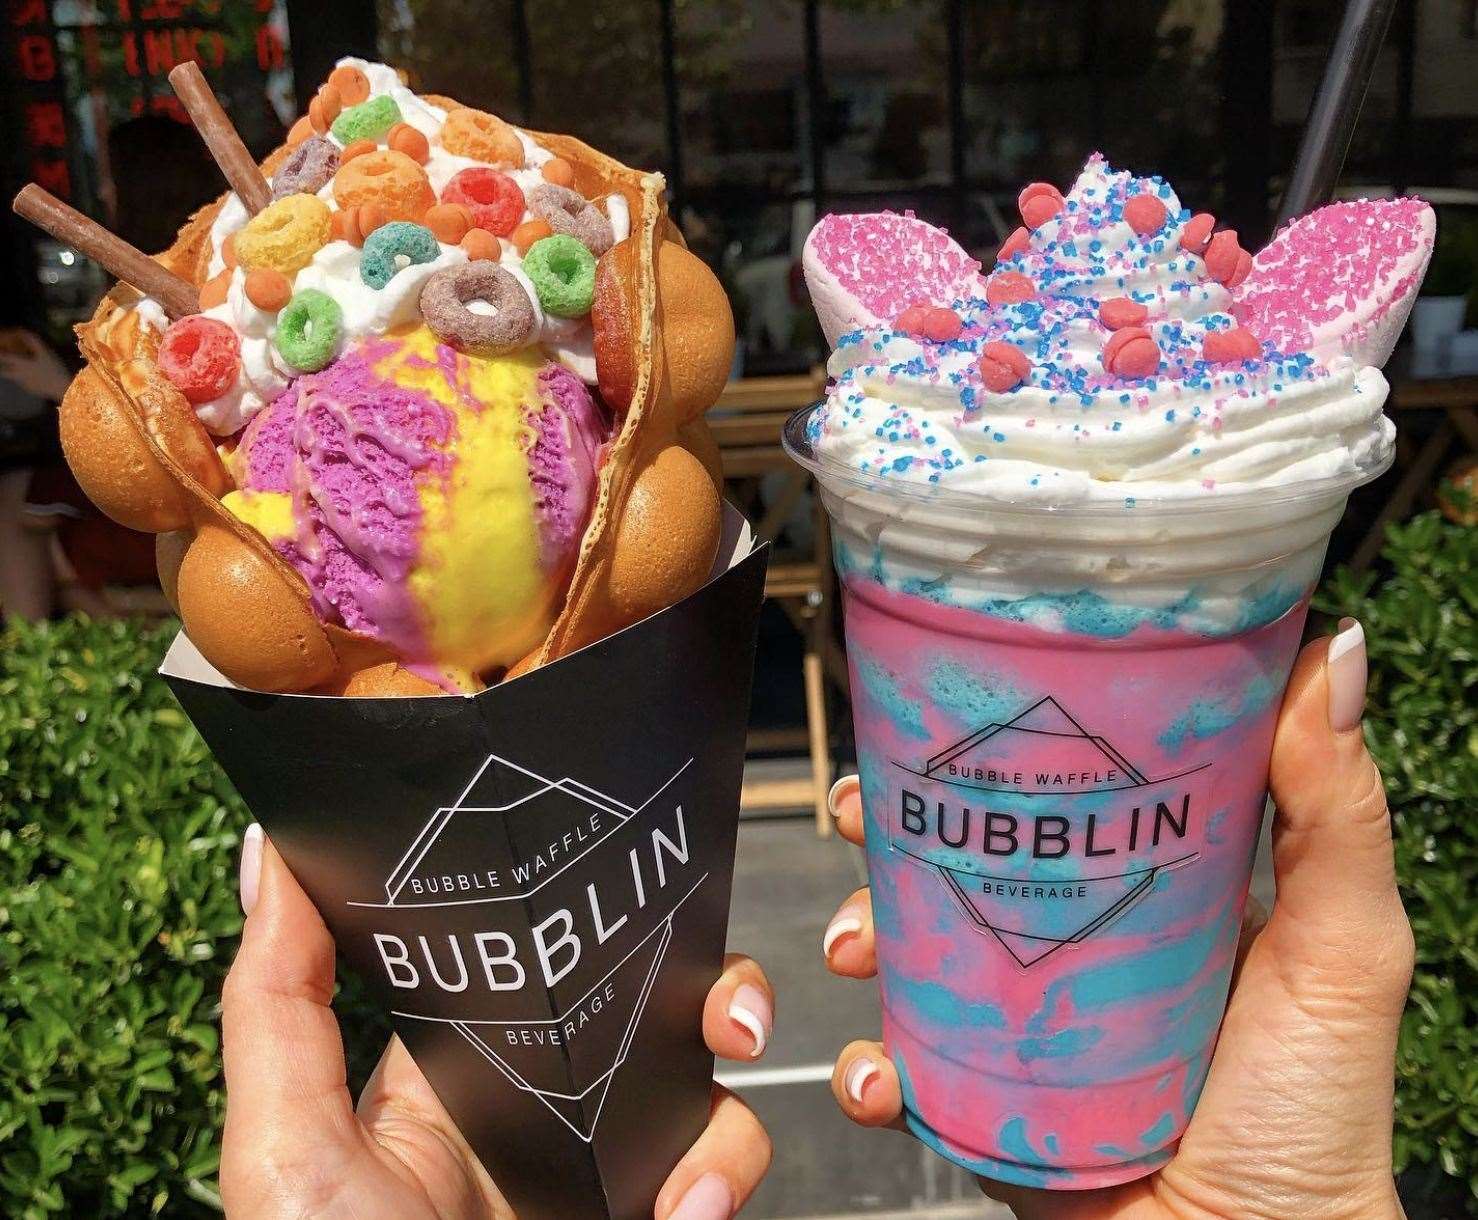 Some of the products Bubblin offer. Picture: @bubblinwaffle/Instagram